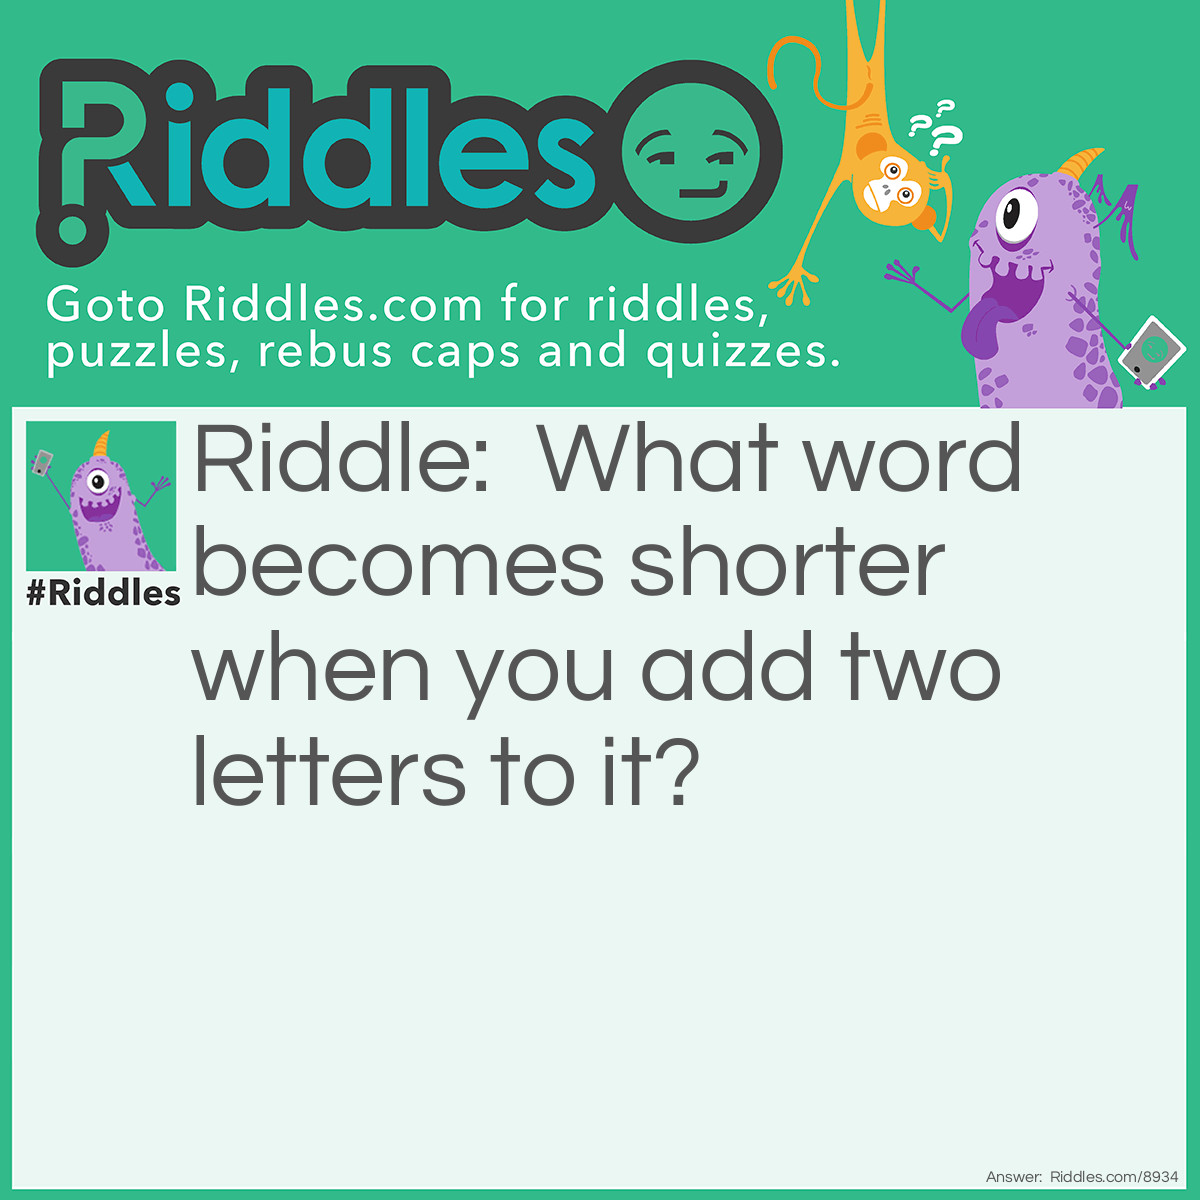 Riddle: What word becomes shorter when you add two letters to it? Answer: Short